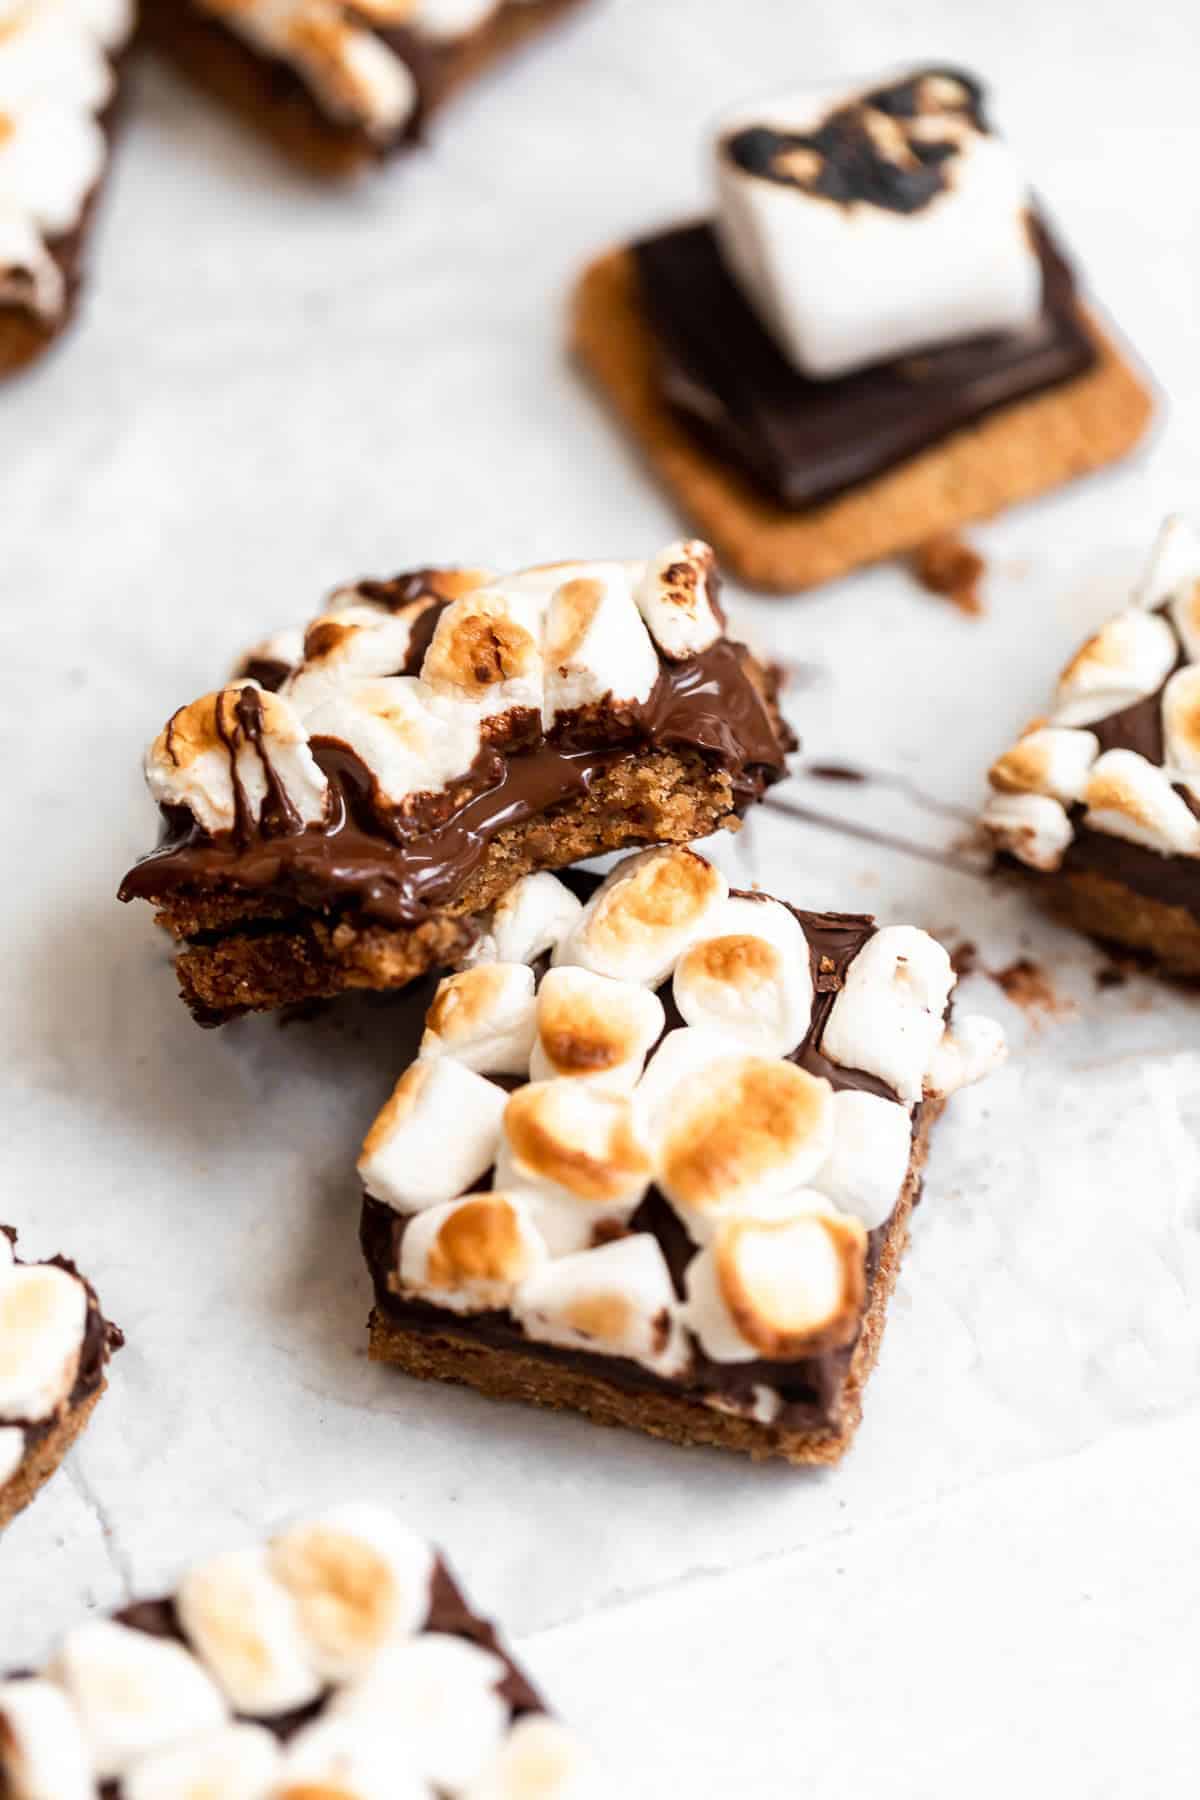 Stack of vegan smores bars to show the melted chocolate.